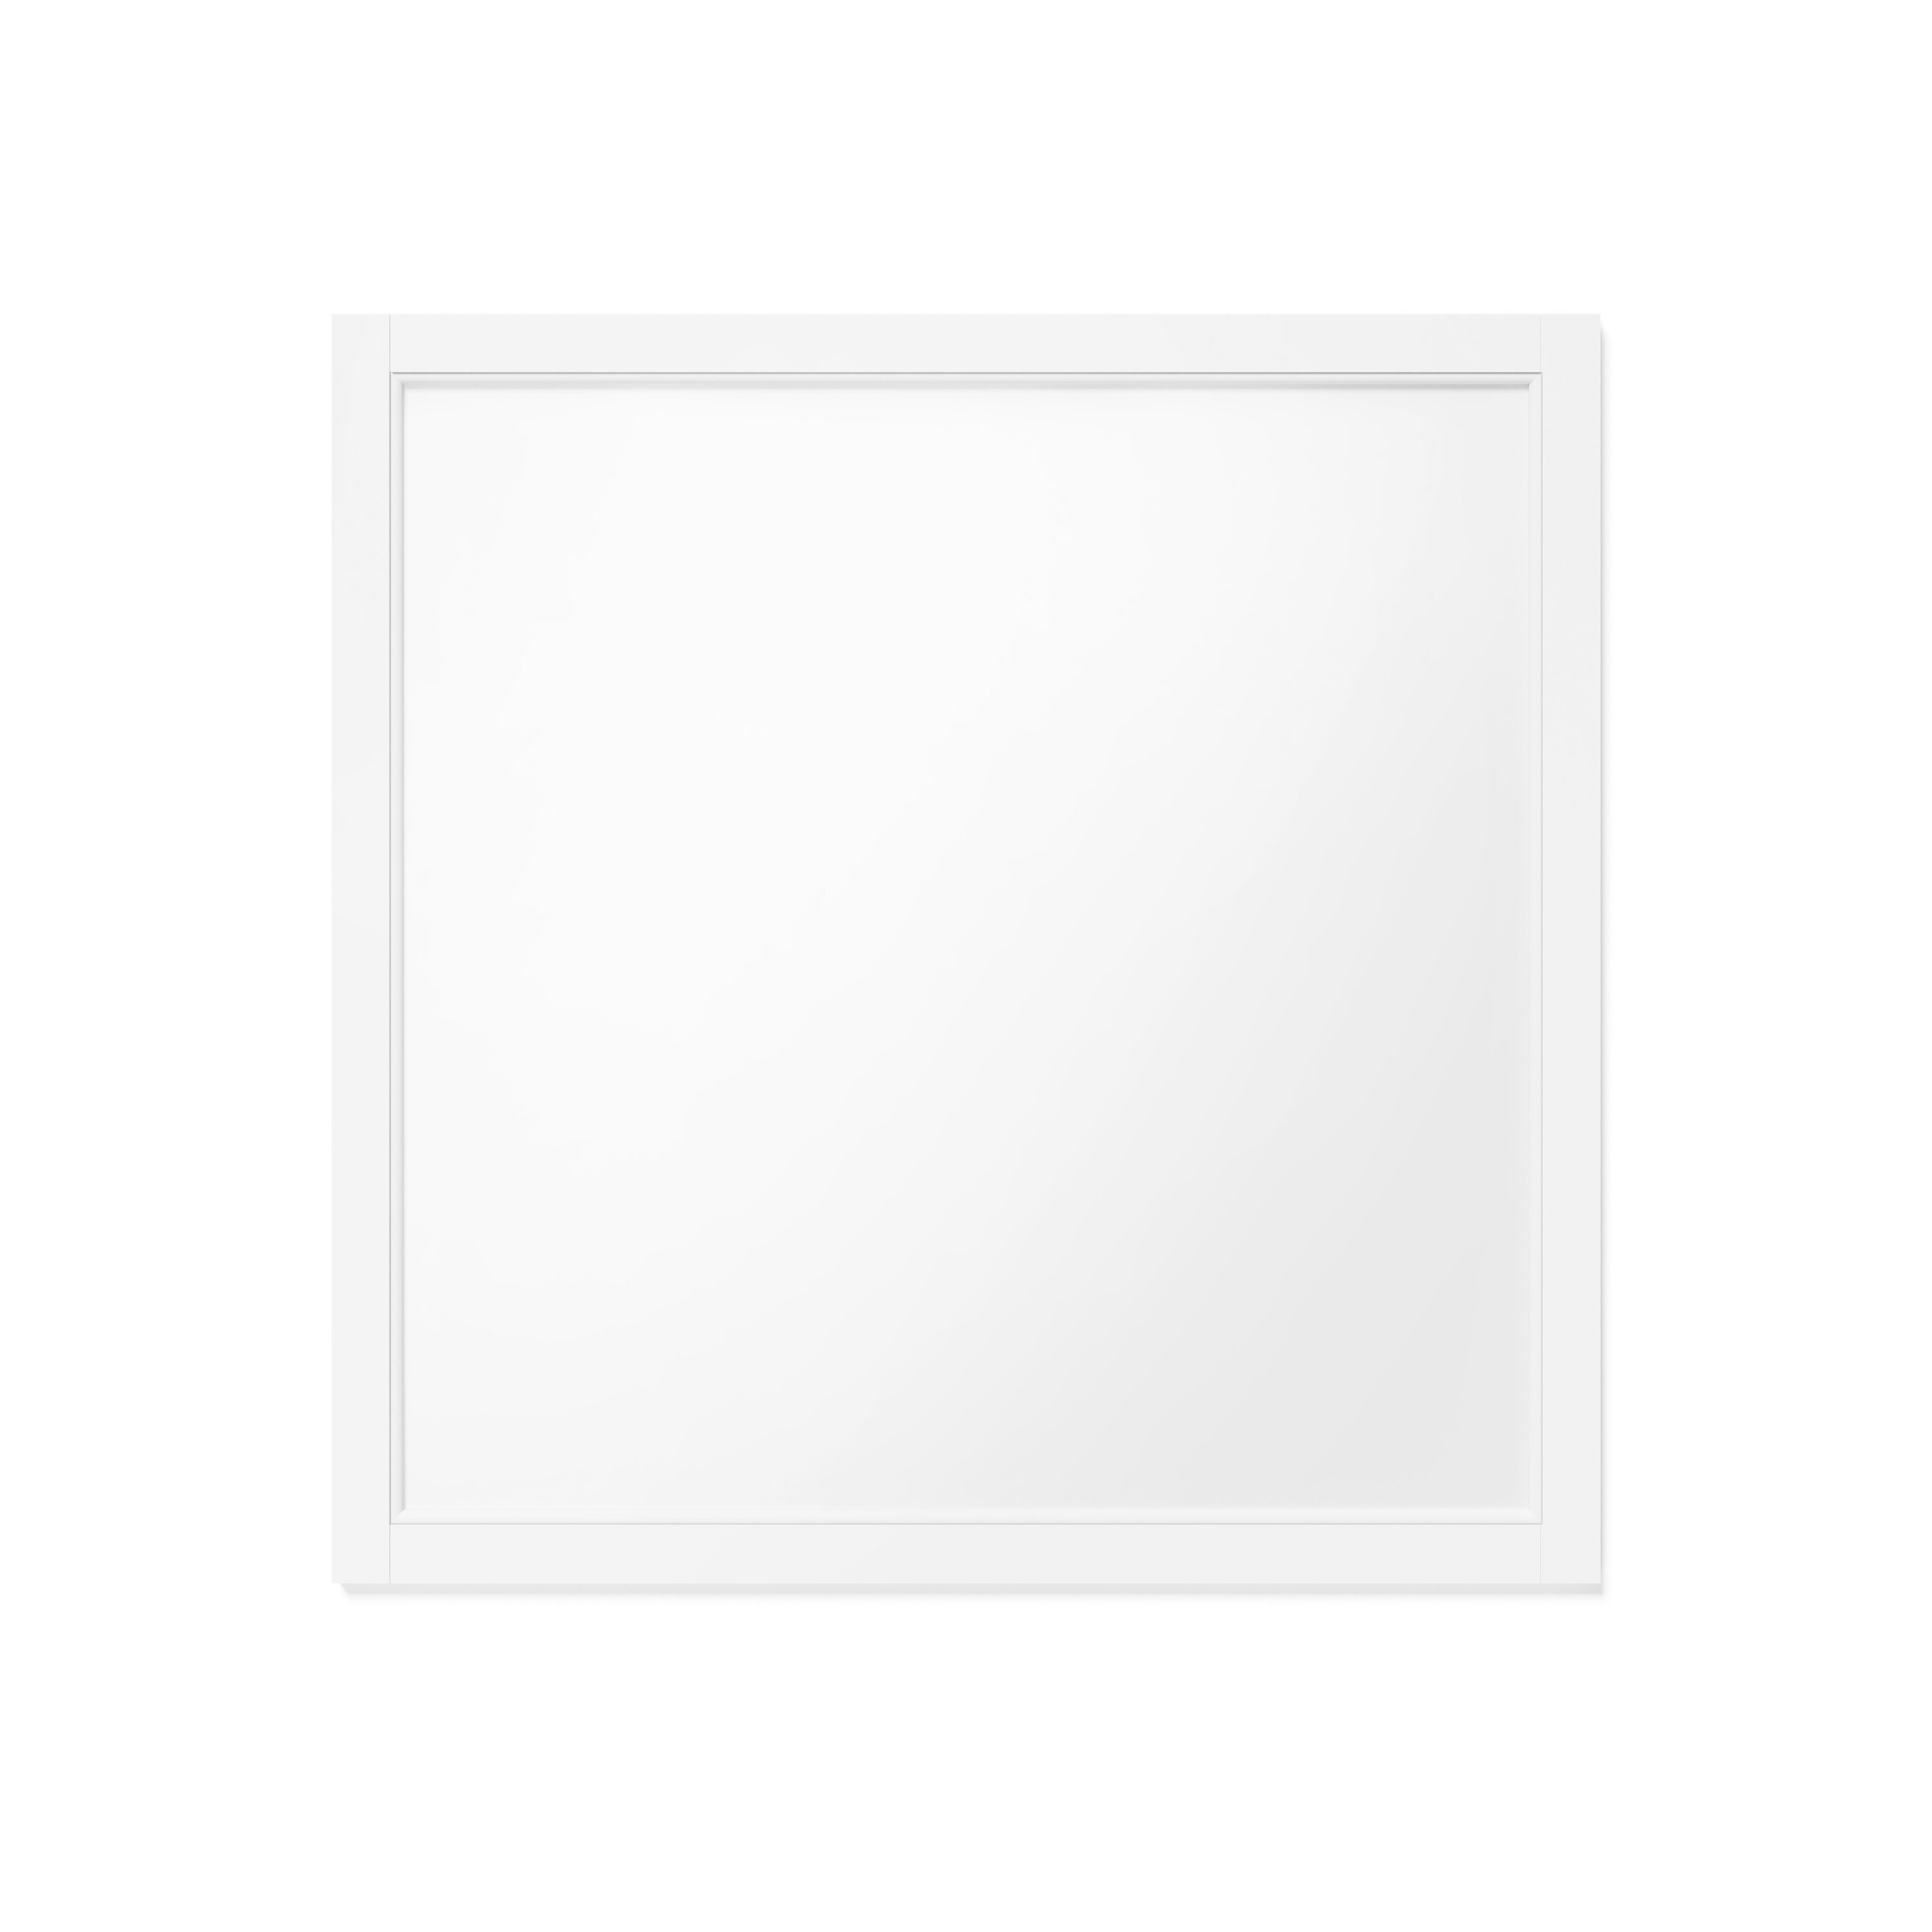 allen + roth Rigsby 32-in x 32-in Framed Square Bathroom Vanity Mirror ...